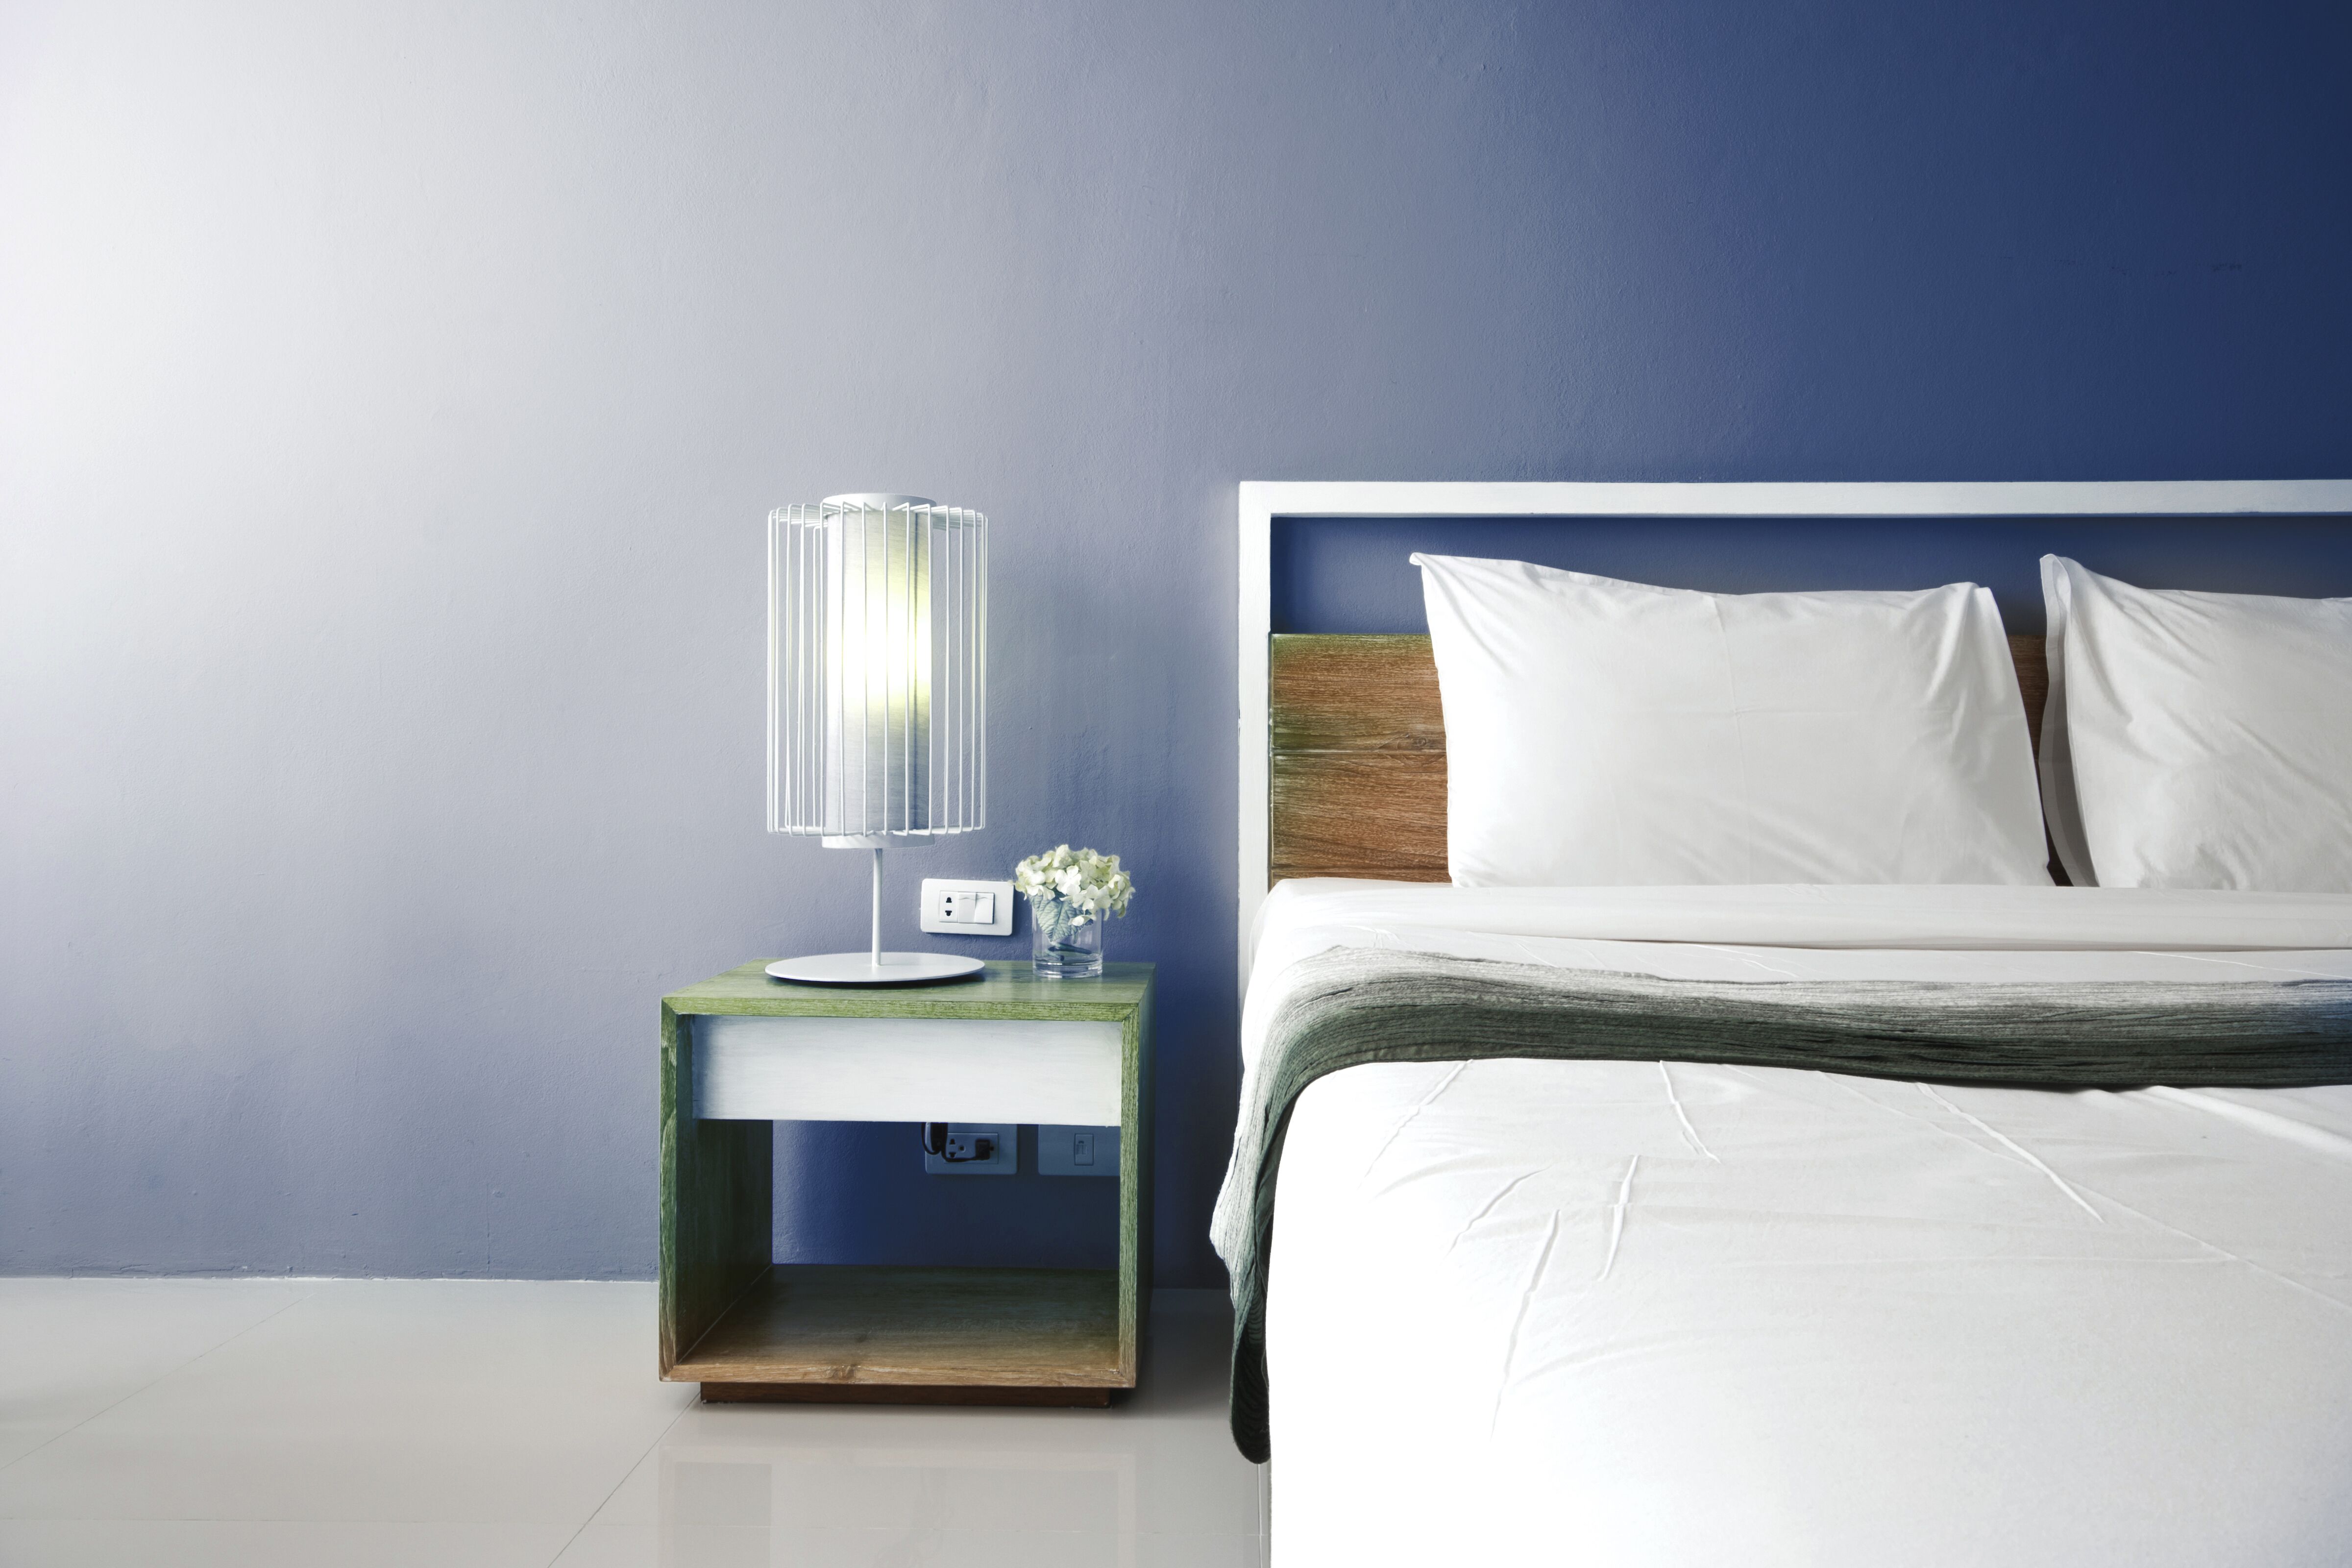 6 Of The Best Modern Paint Colors For Bedrooms Long Beach Ca